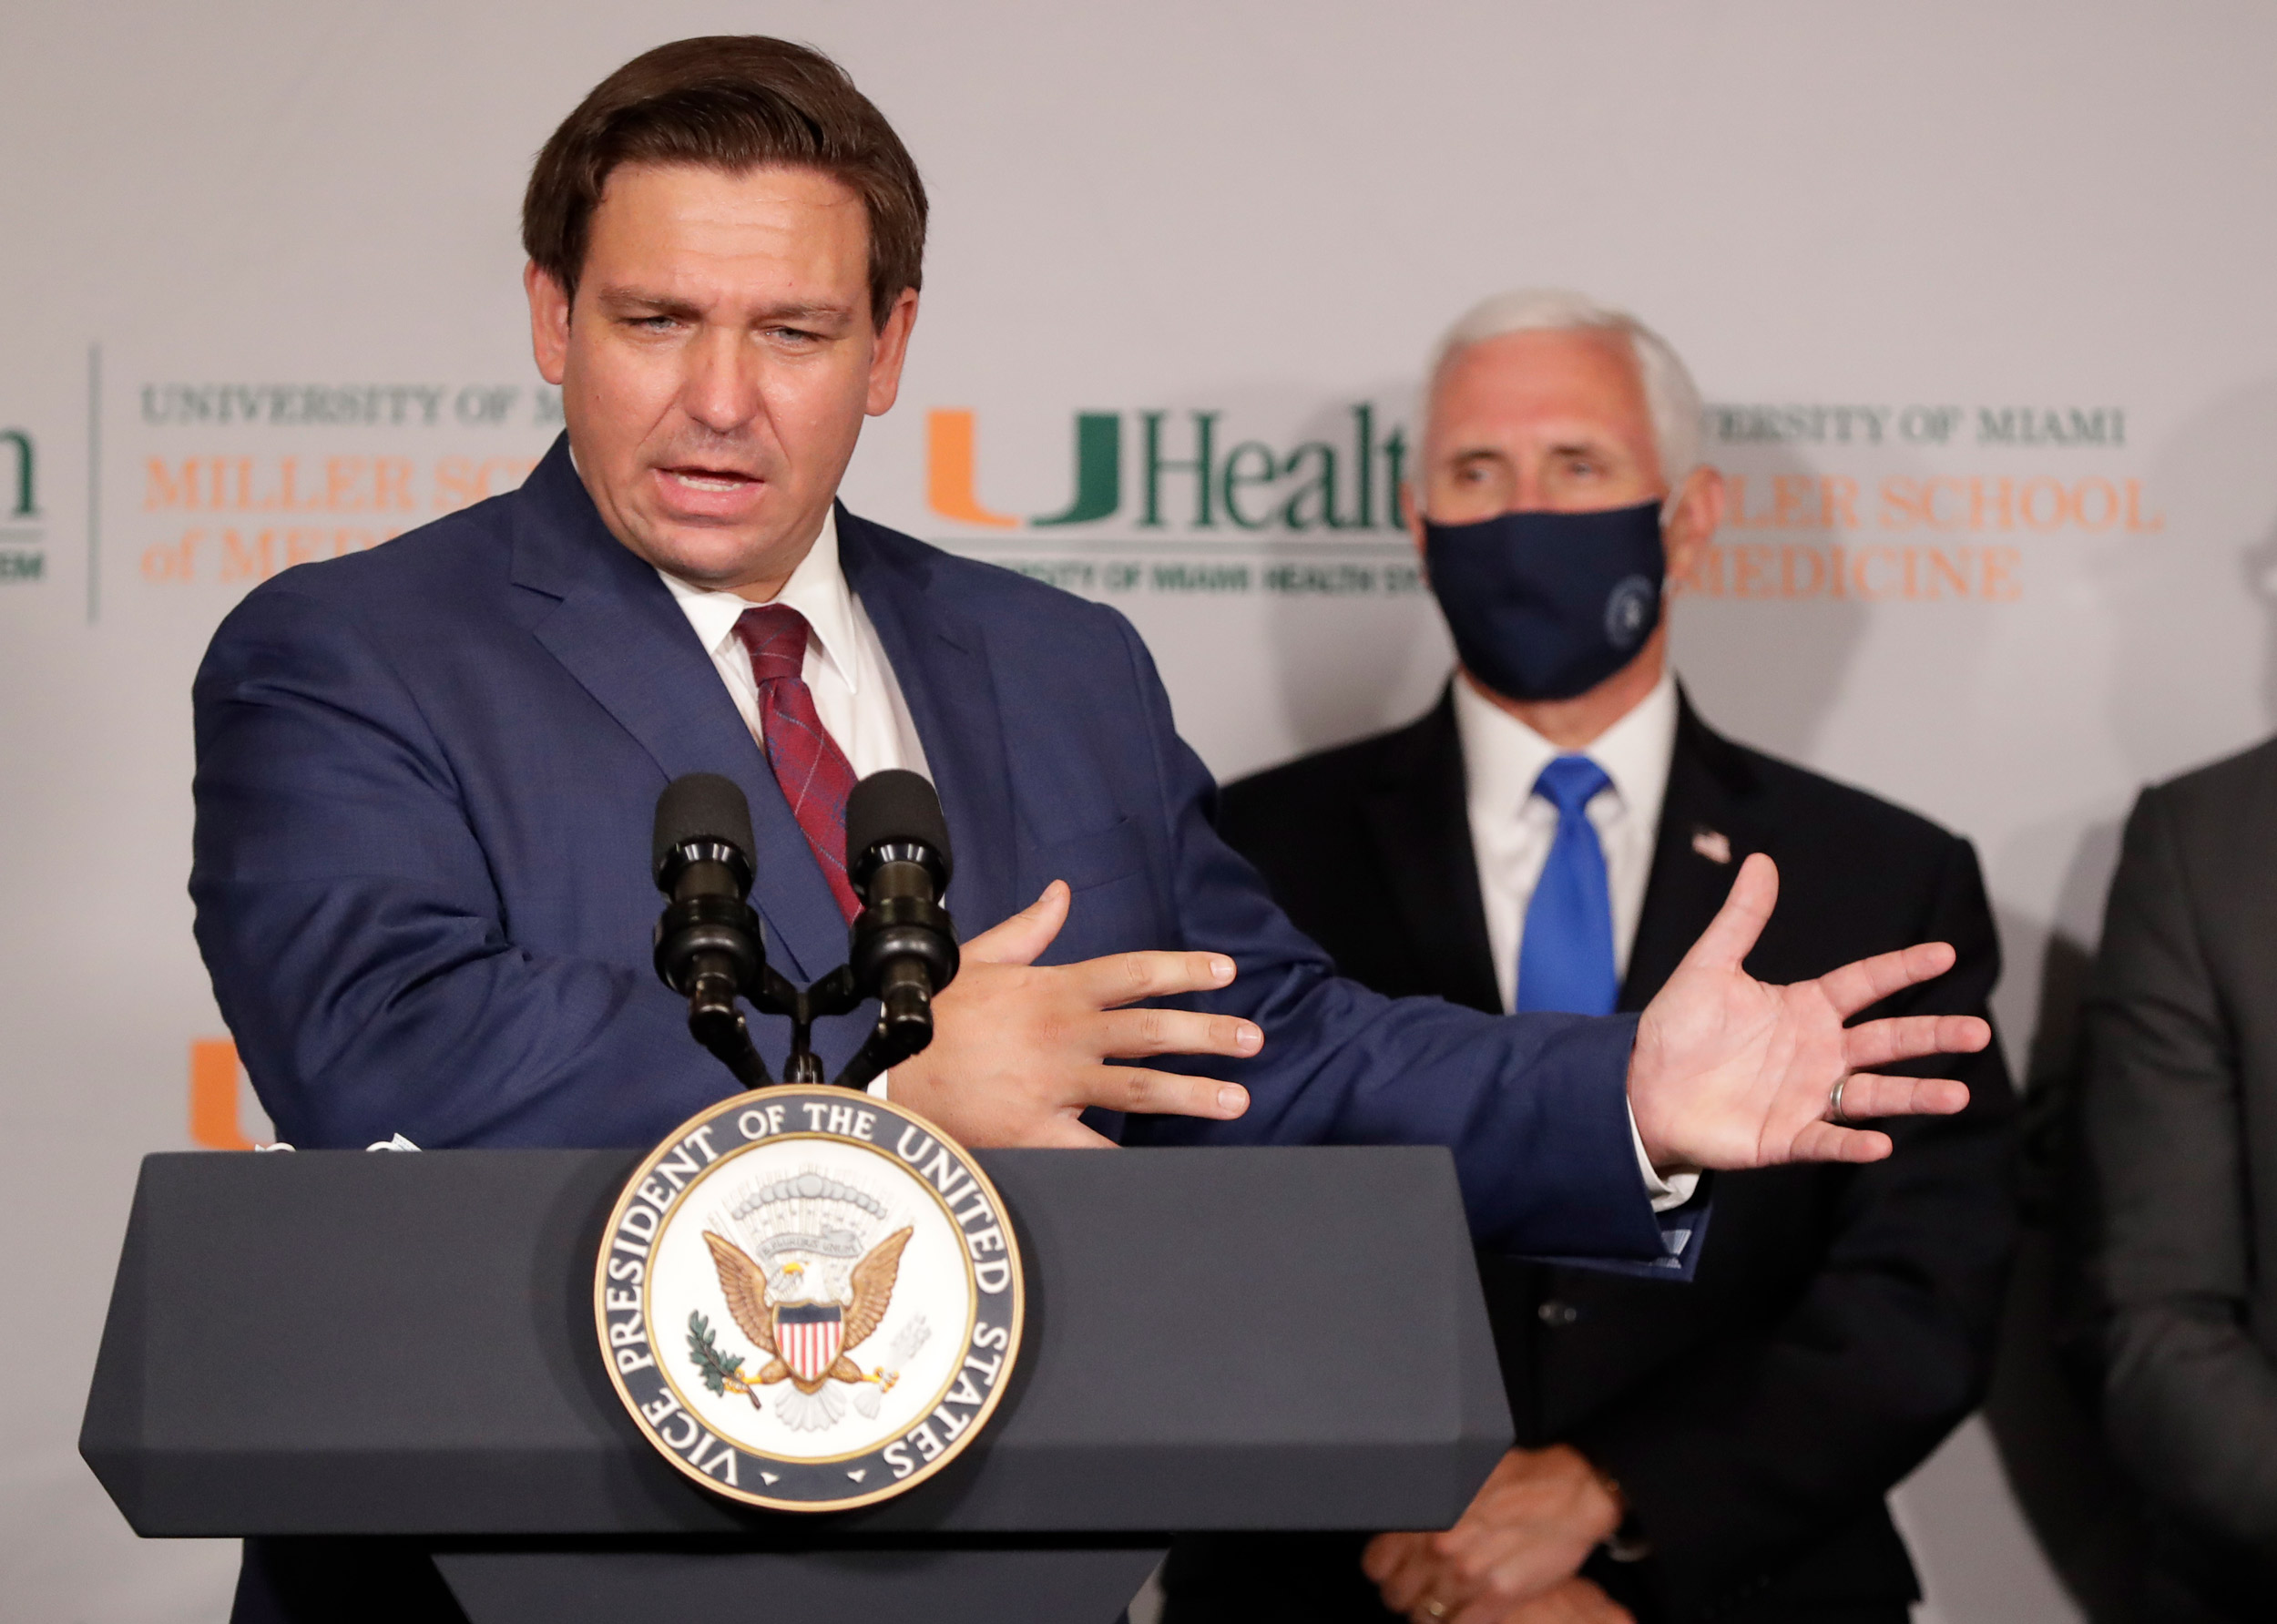 Florida Gov. Ron DeSantis, left, speaks during a news conference as Vice President Mike Pence at the University of Miami Miller School of Medicine Don Soffer Clinical Research Center on July 27 in Miami.